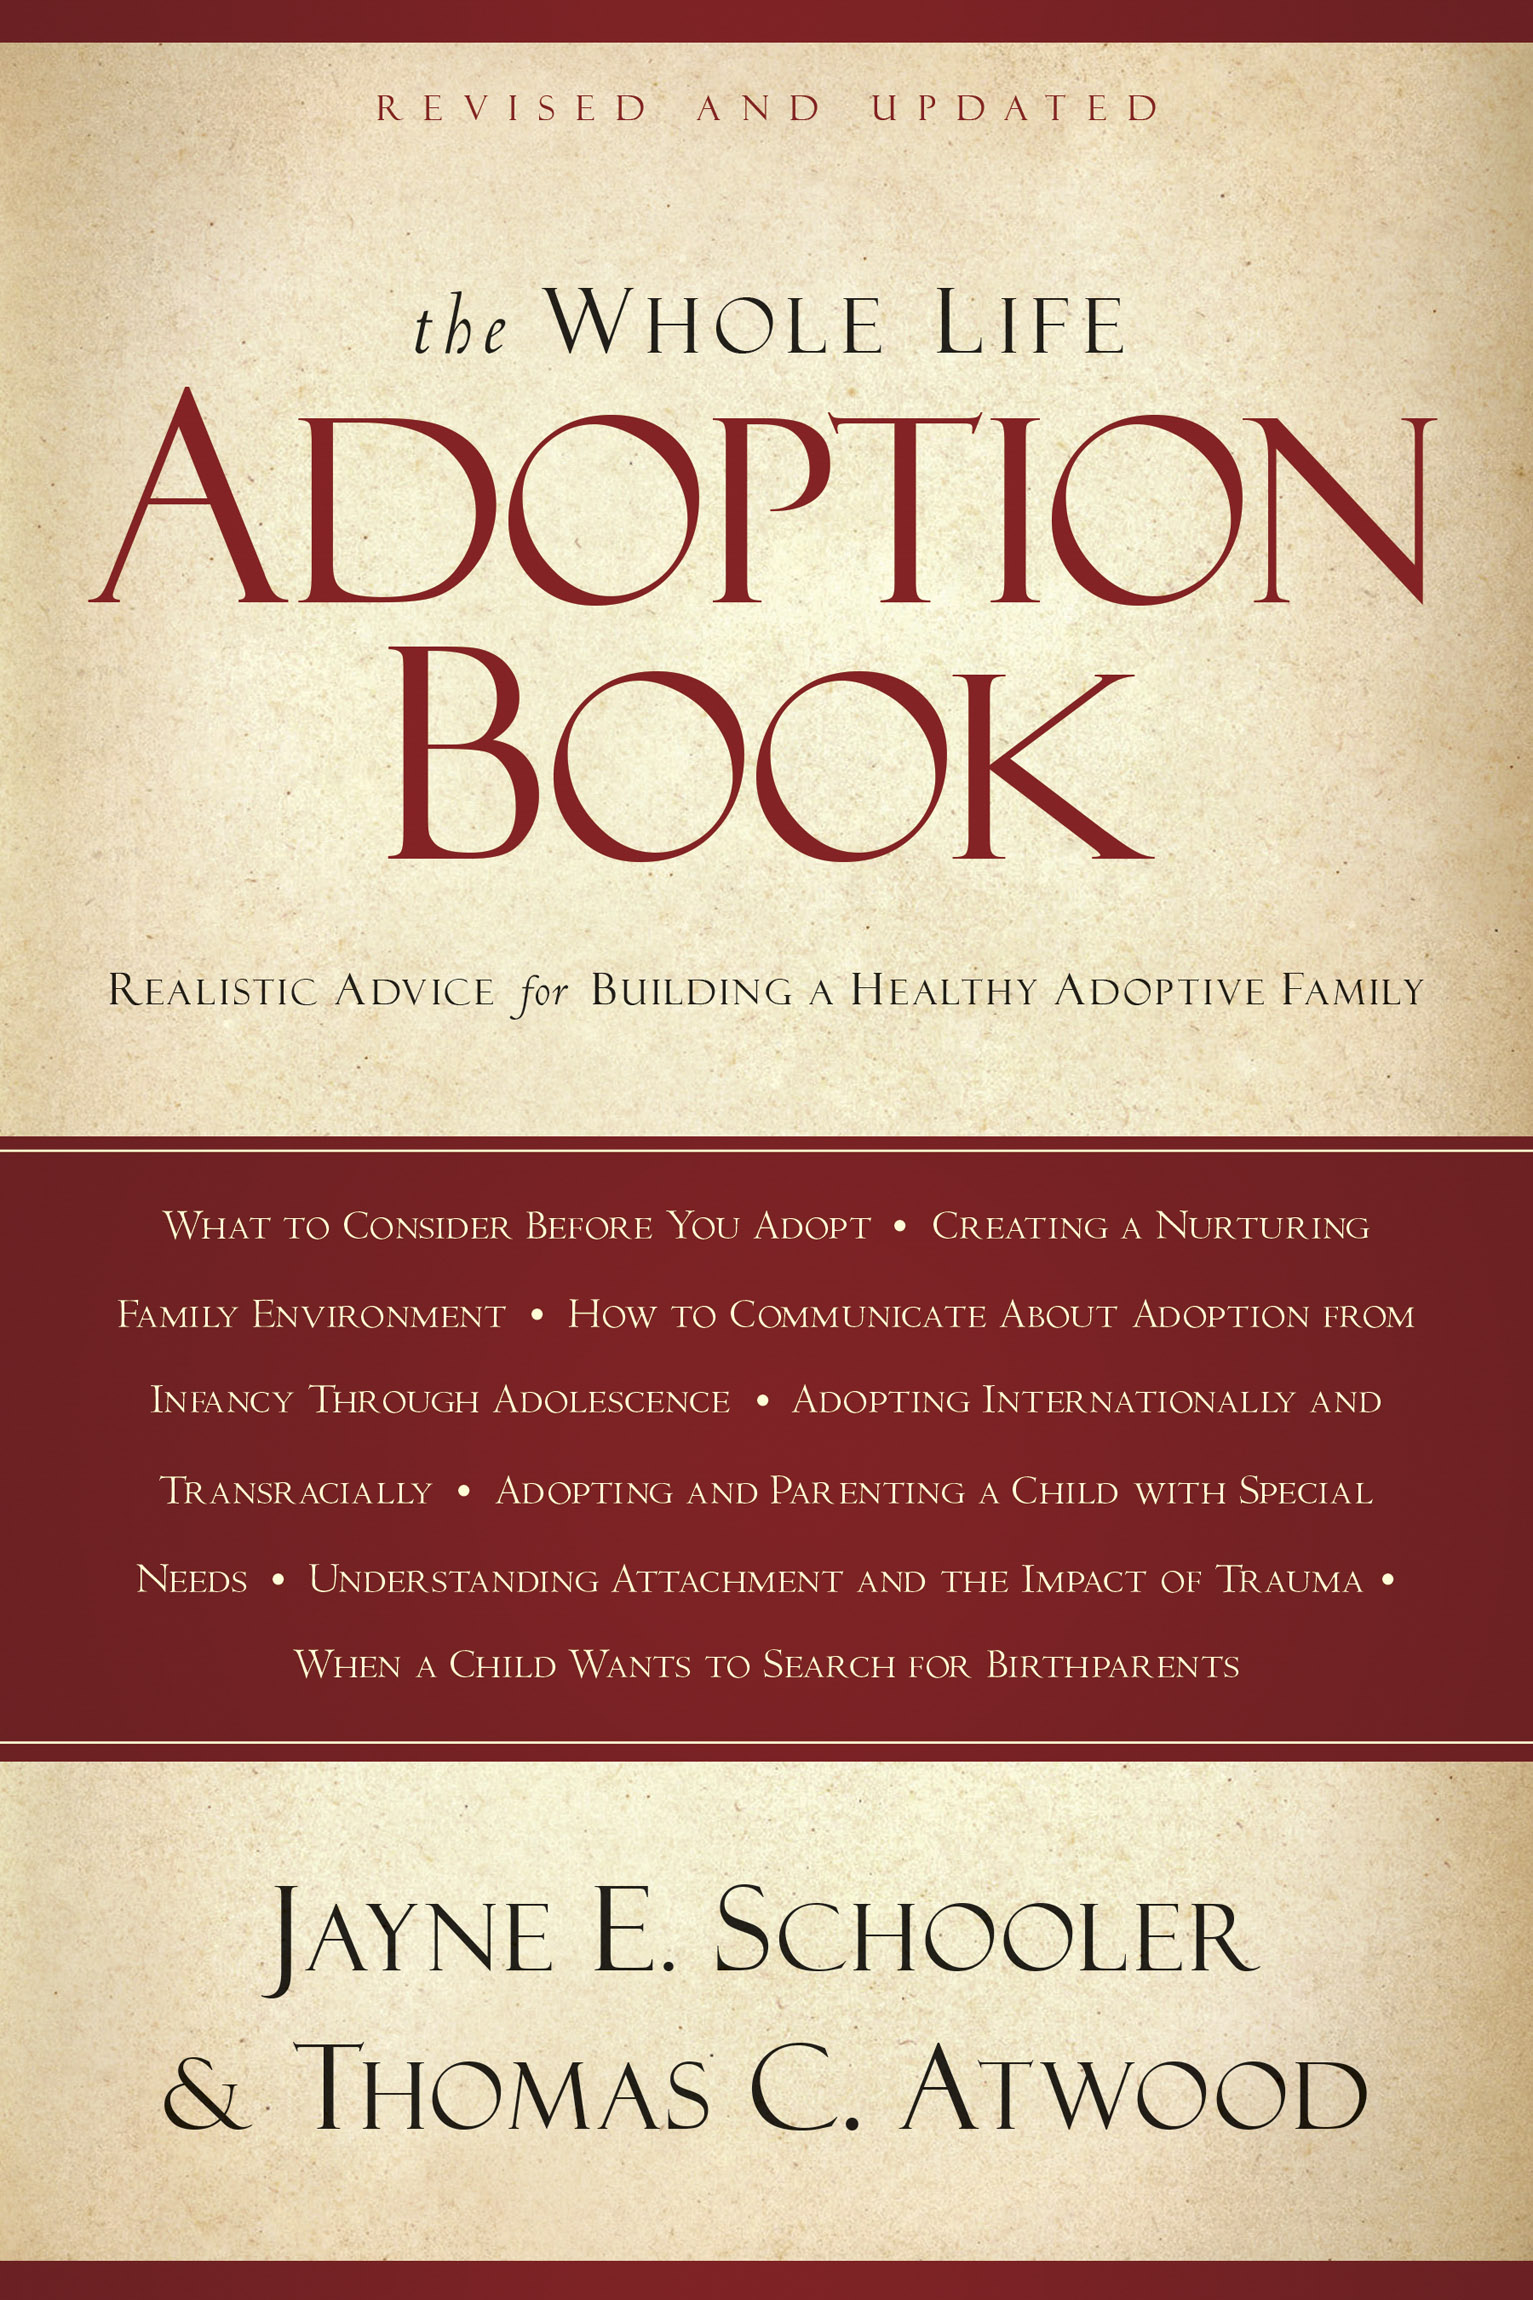 The Whole Life Adoption Book is a comprehensive guide for adoptive parents - photo 1